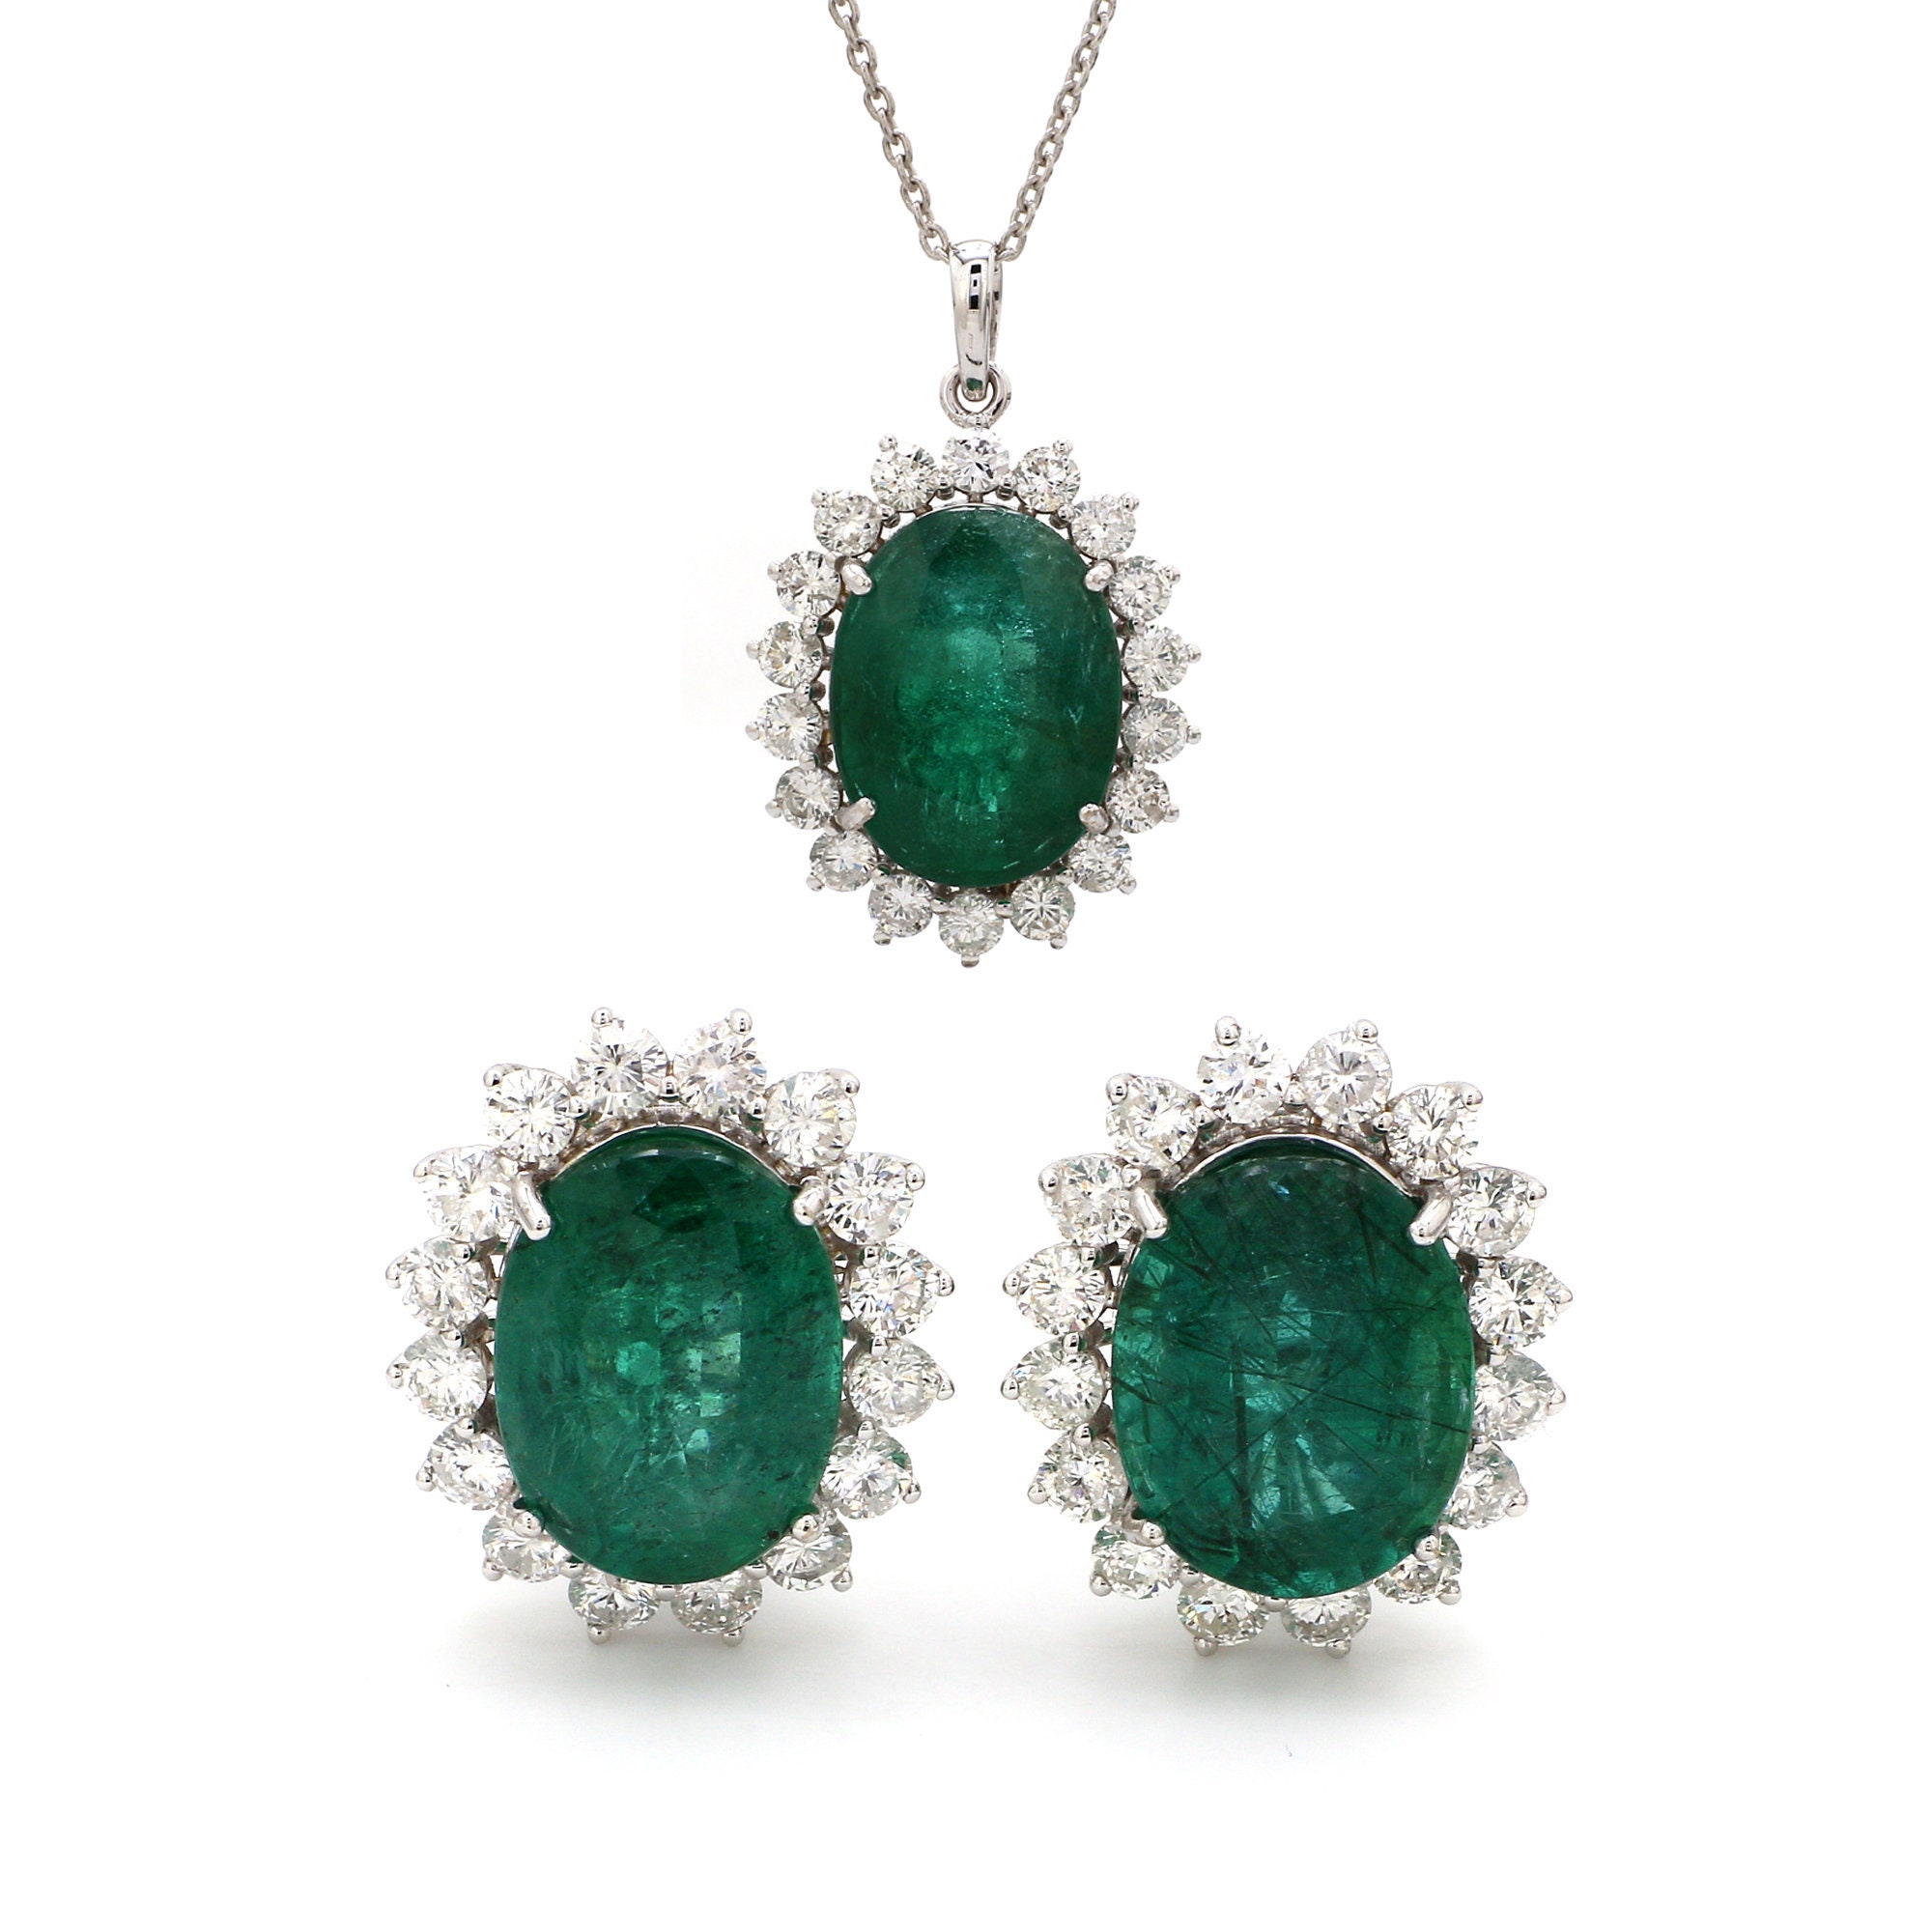 New Oval Shaped Emerald Stud Earrings & Pendant With Chain 18K White Gold Diamond Jewelry Wedding Set